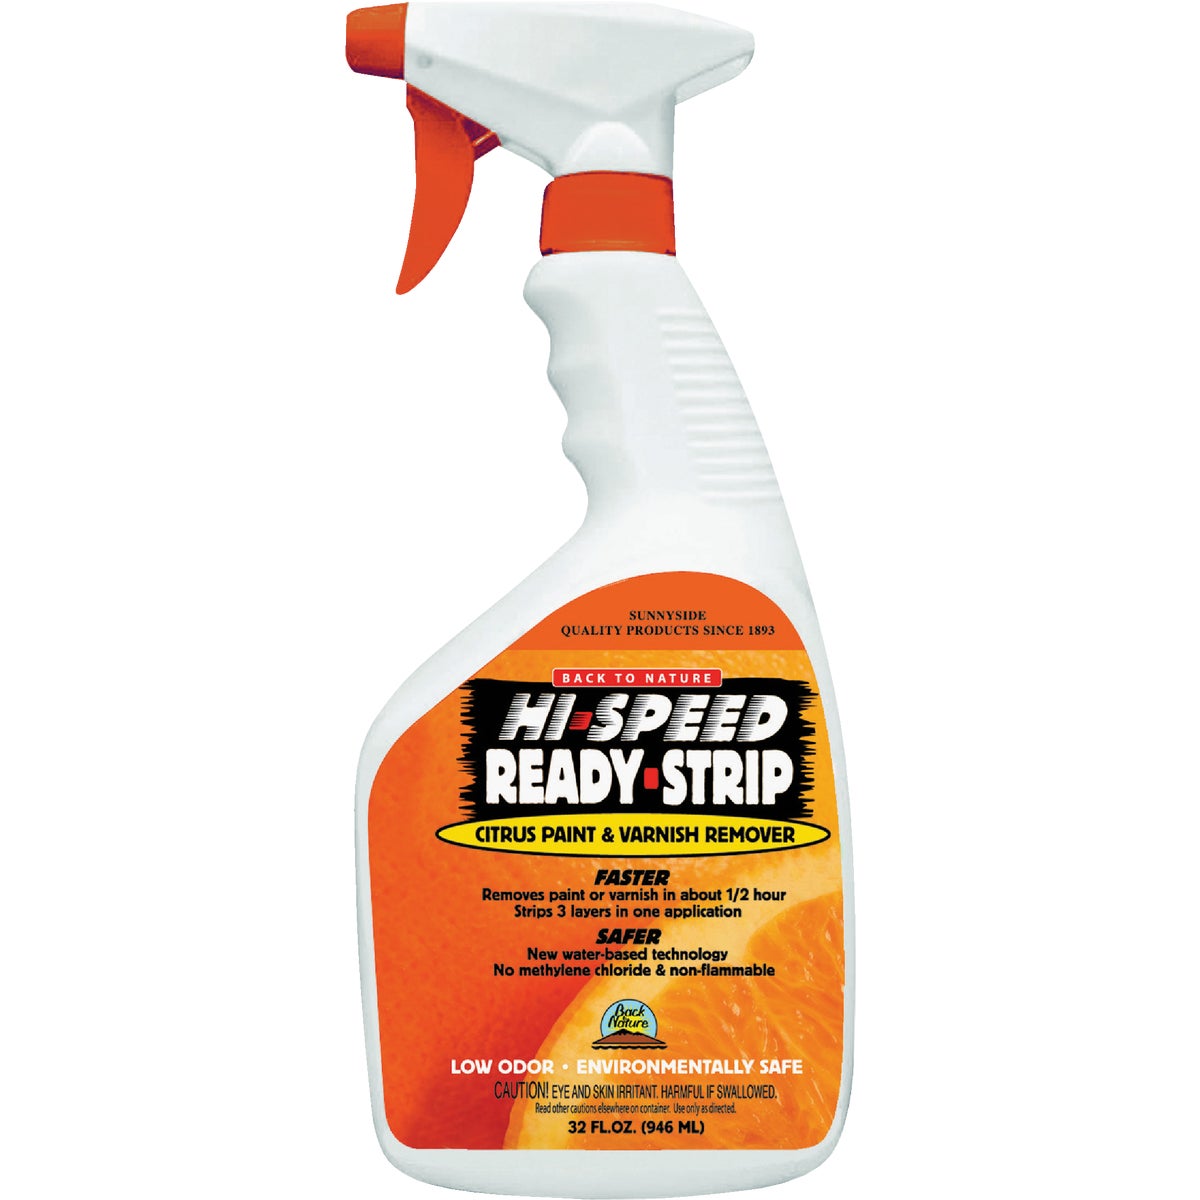 Back to Nature Ready-Strip 32 Oz. Trigger Spray Water-Based, Non-Toxic Remover